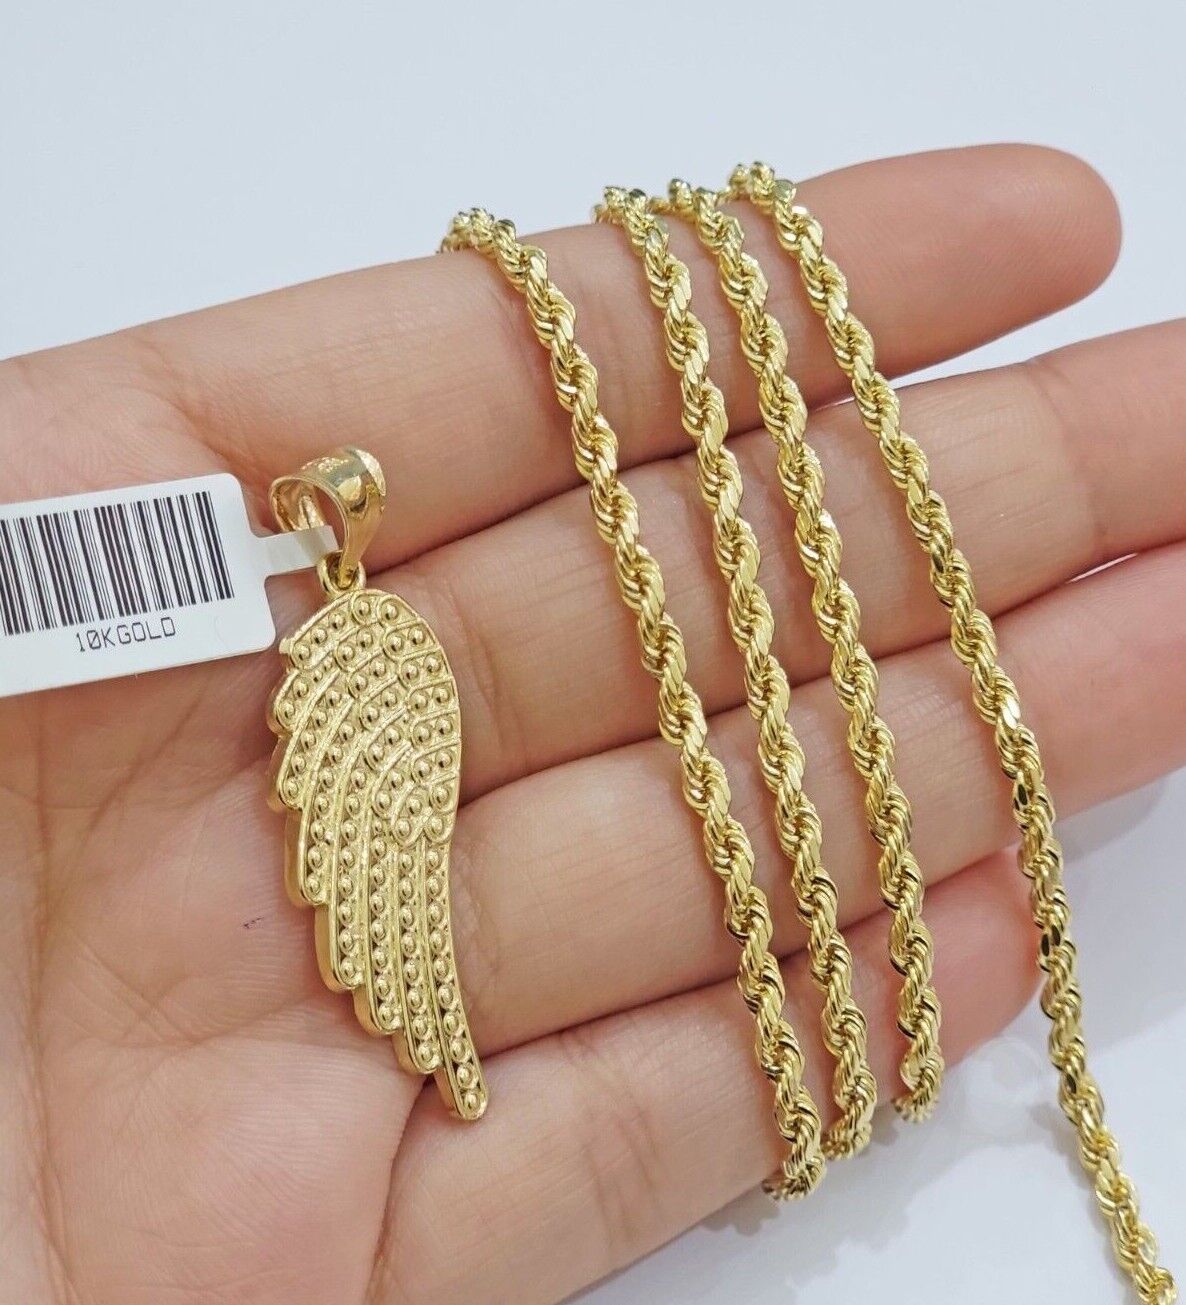 10k Gold Rope Chain Angel Wing Charm Pendant Set 18-28'' Inch 3mm Necklace REAL